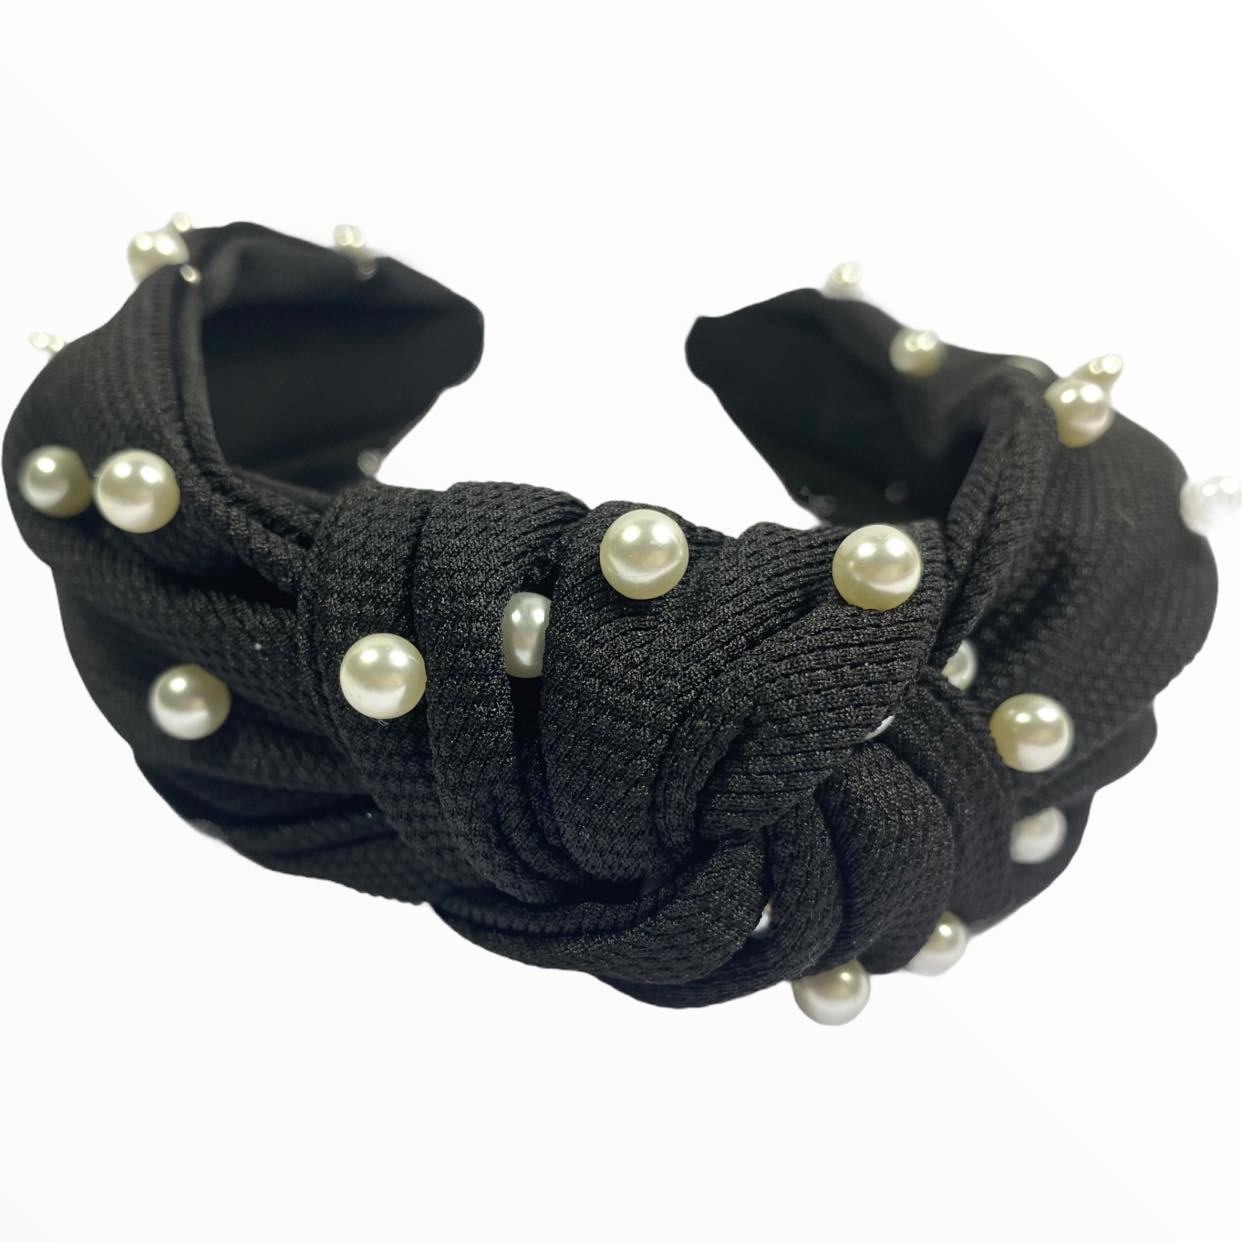 Black Knotted Headband with Pearls